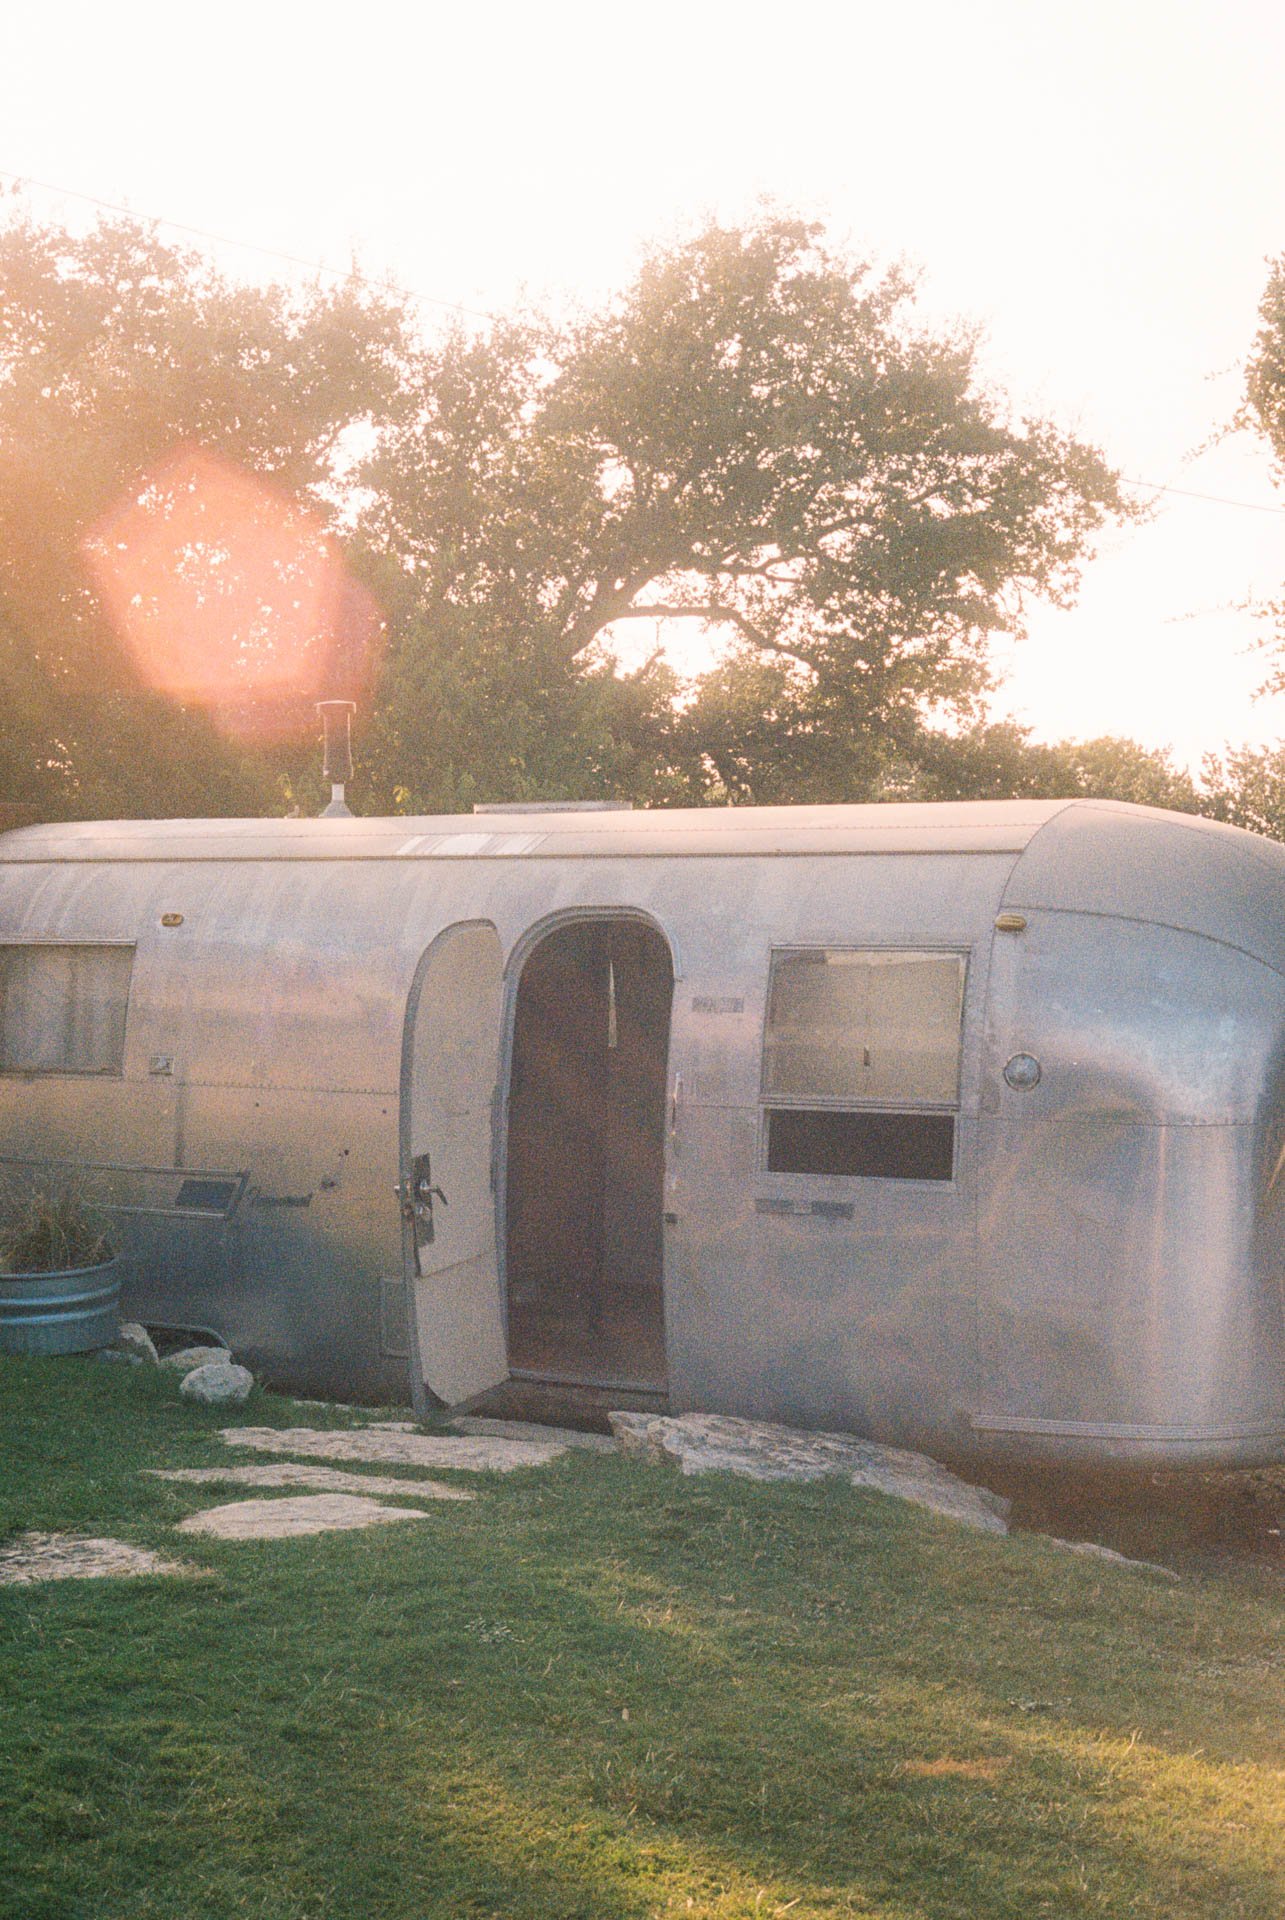 Airstream-at-Jester-King-Brewing-in-Texas-on-Film-2.jpg